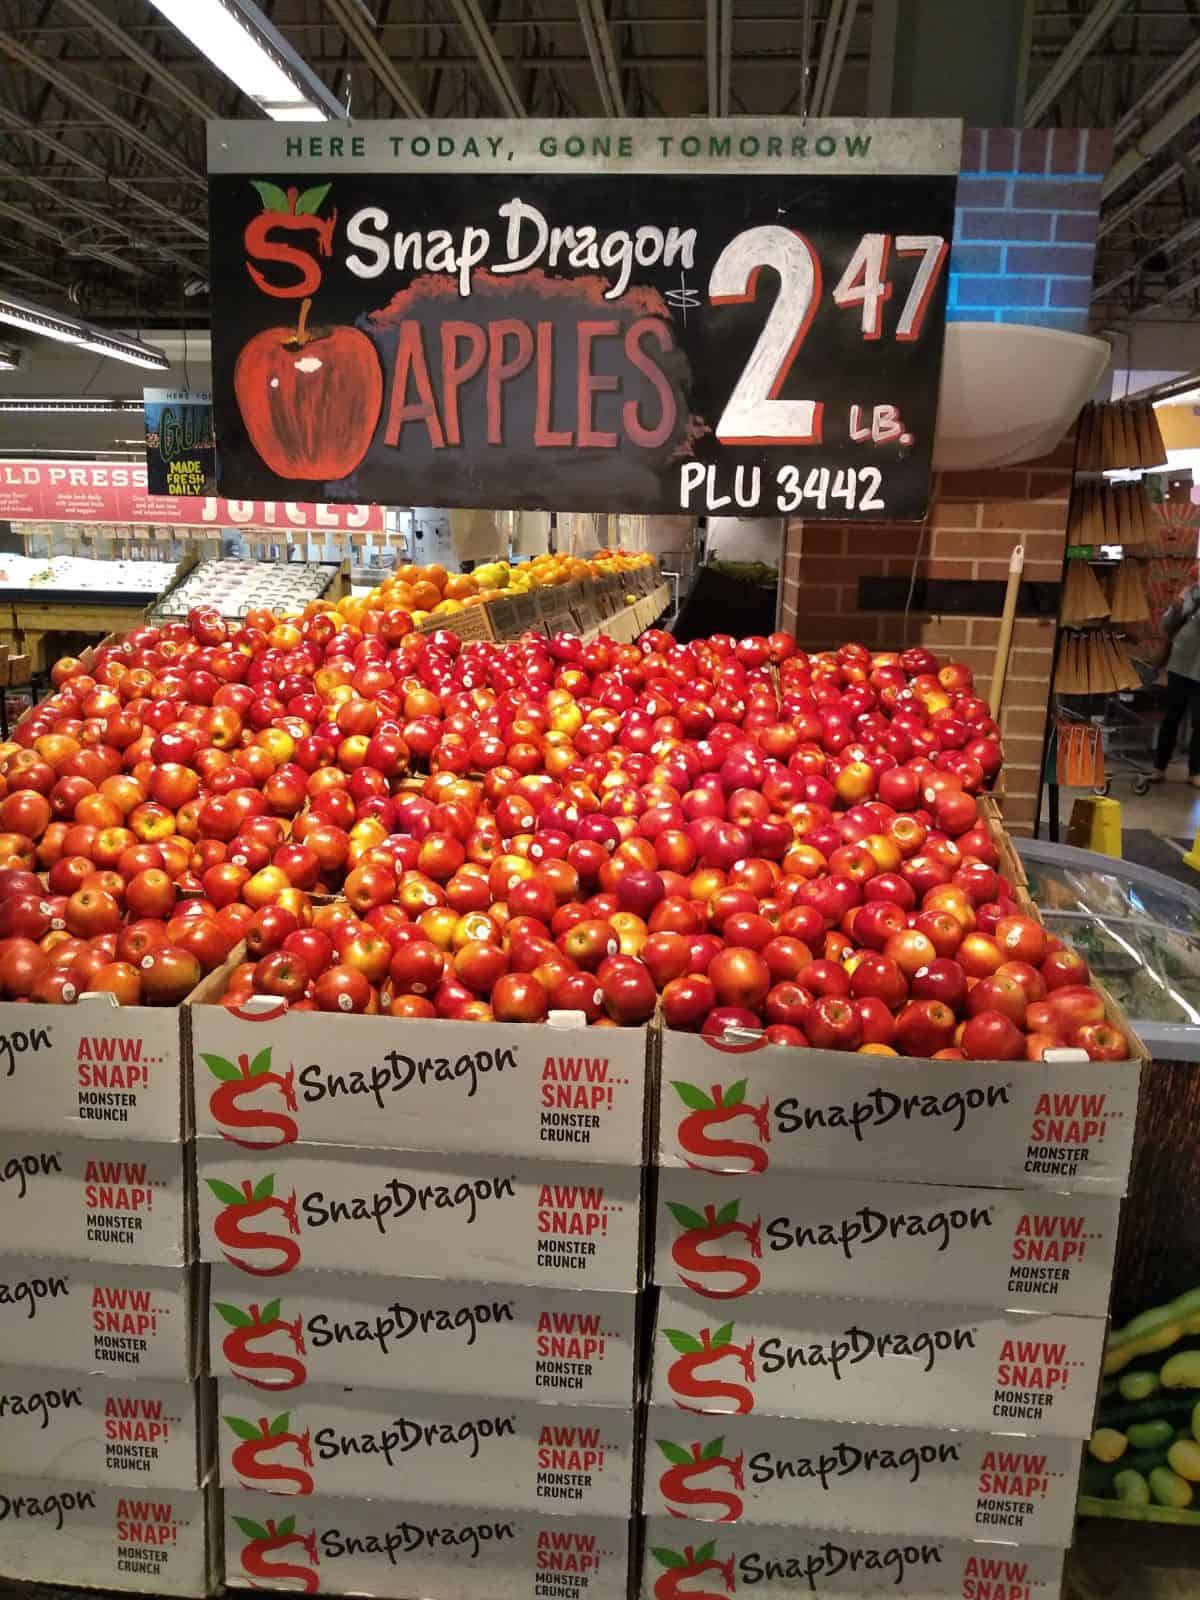 A display at a Central Market store of Snap Dragon Apples that are selling for $2.47/lb.